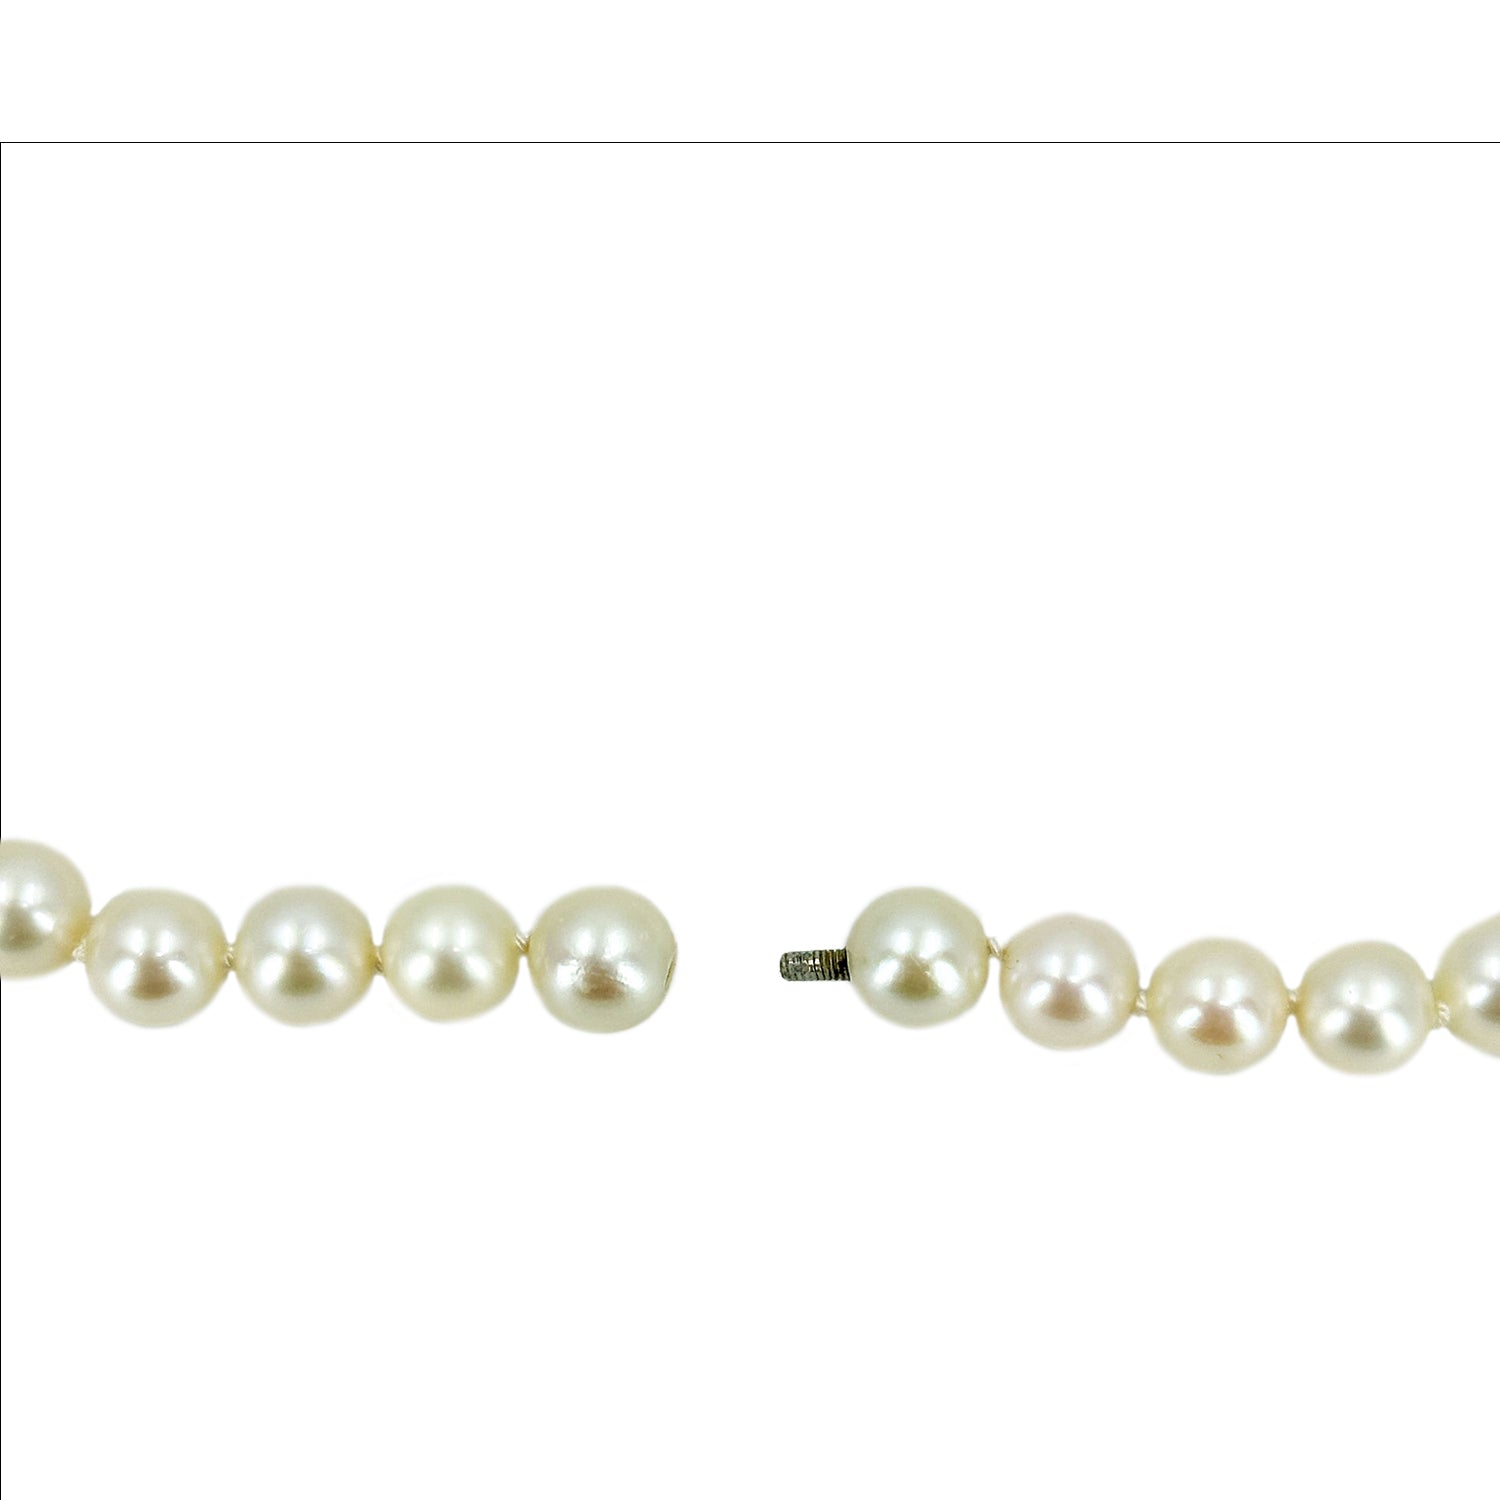 Hidden Clasp Japanese Saltwater Cultured Akoya Pearl Vintage Necklace Strand - 24 Inch